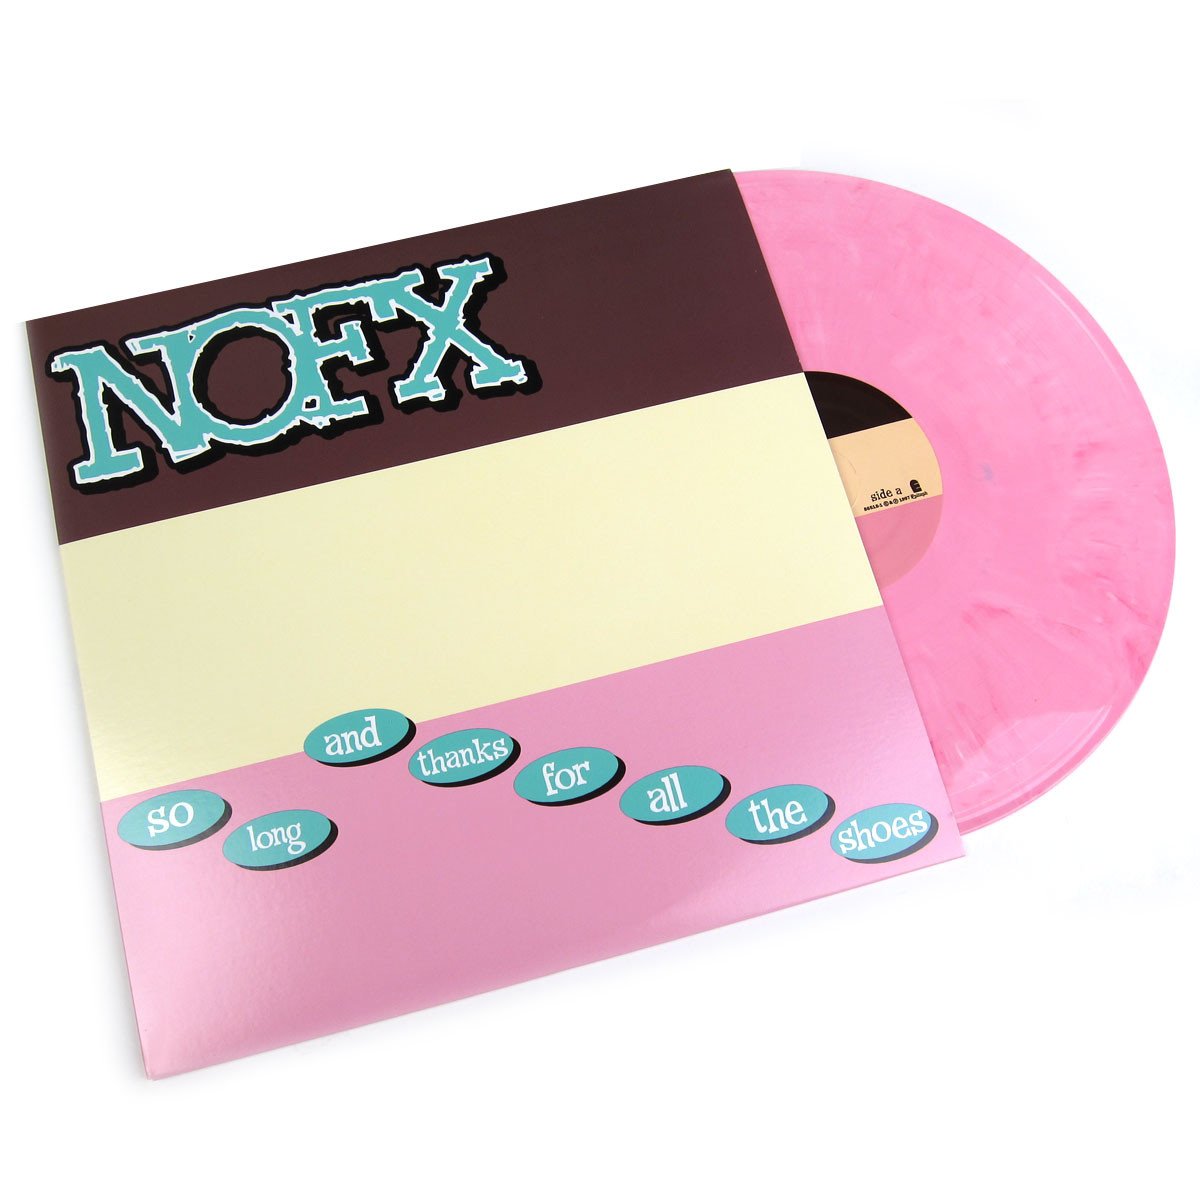 Nofx So Long And Thanks For All The Shoes Zip Up